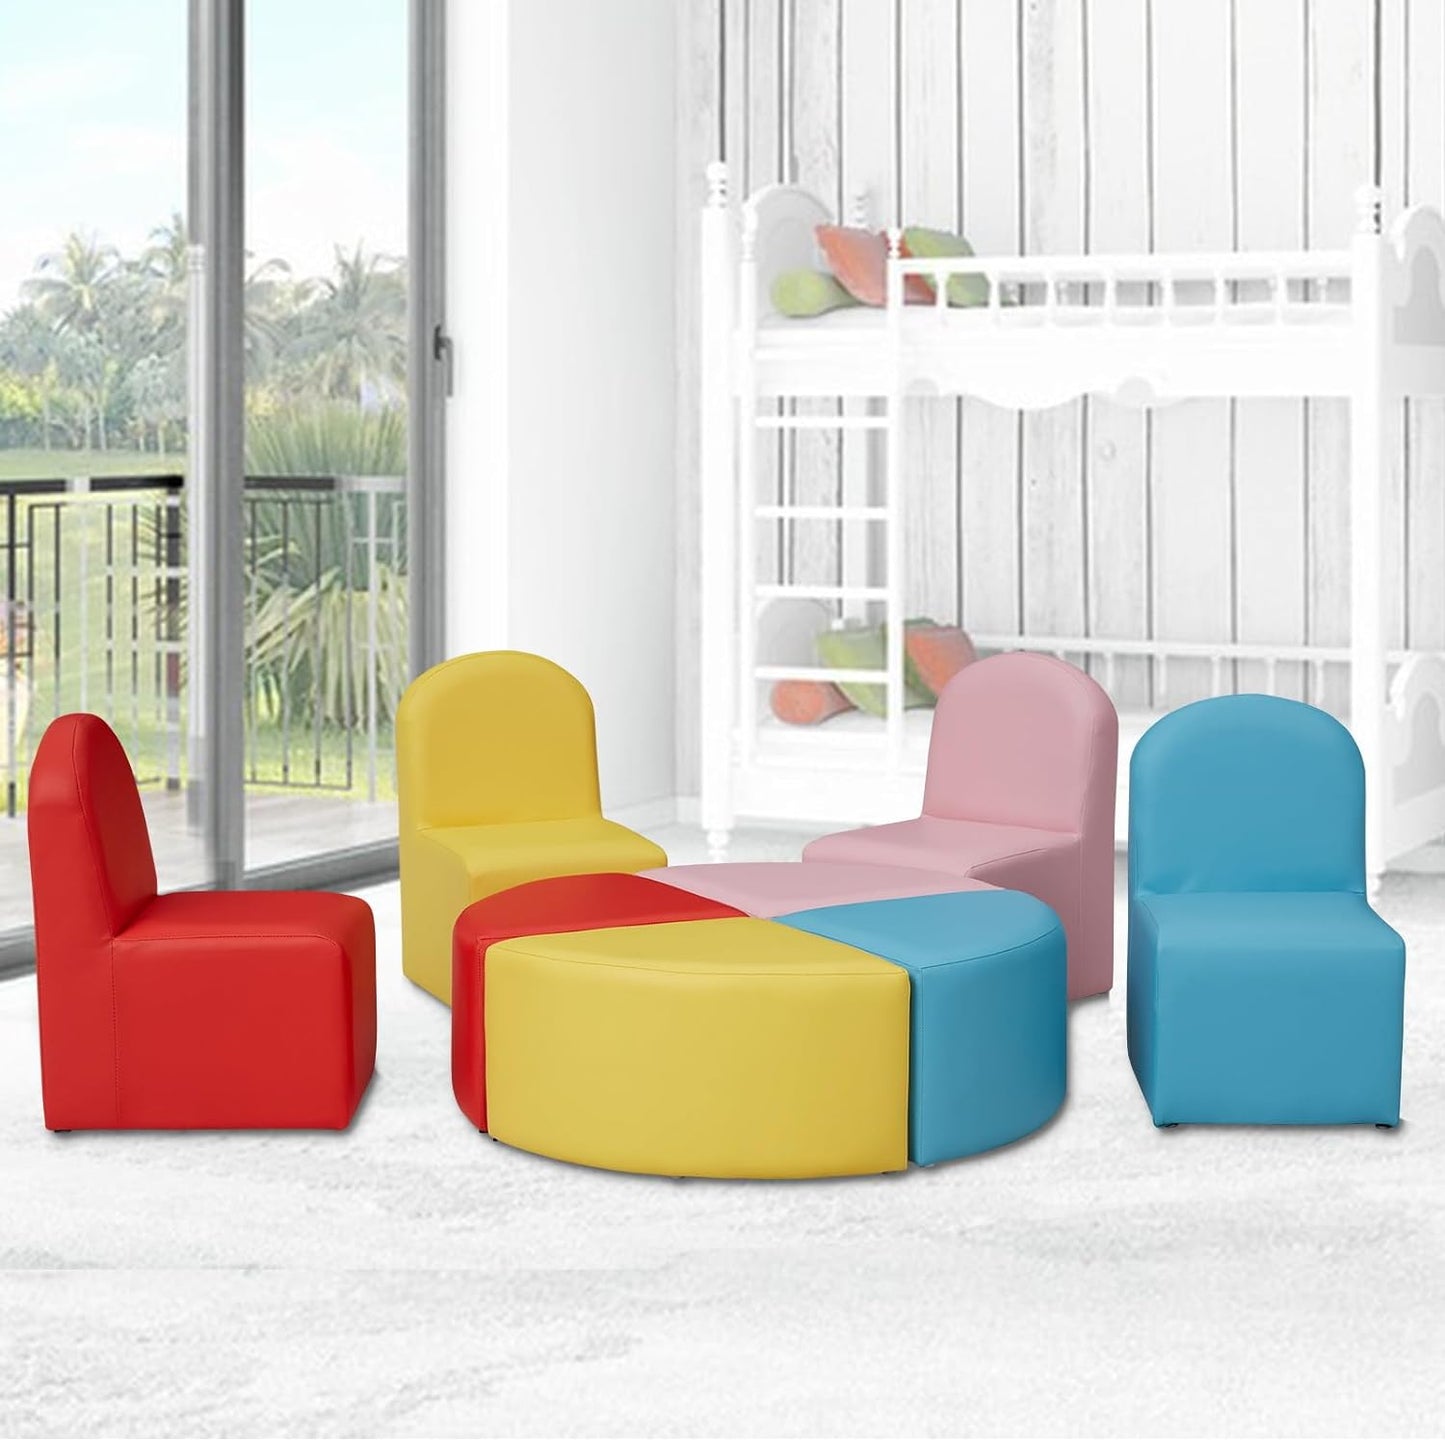 Toddler Couch Daycare Furniture - 8 Pieces Seating Set for Daycare Kids Playroom Furniture, Children Chairs Sofas Colorful Flexible Seating for Home Preschool Playroom